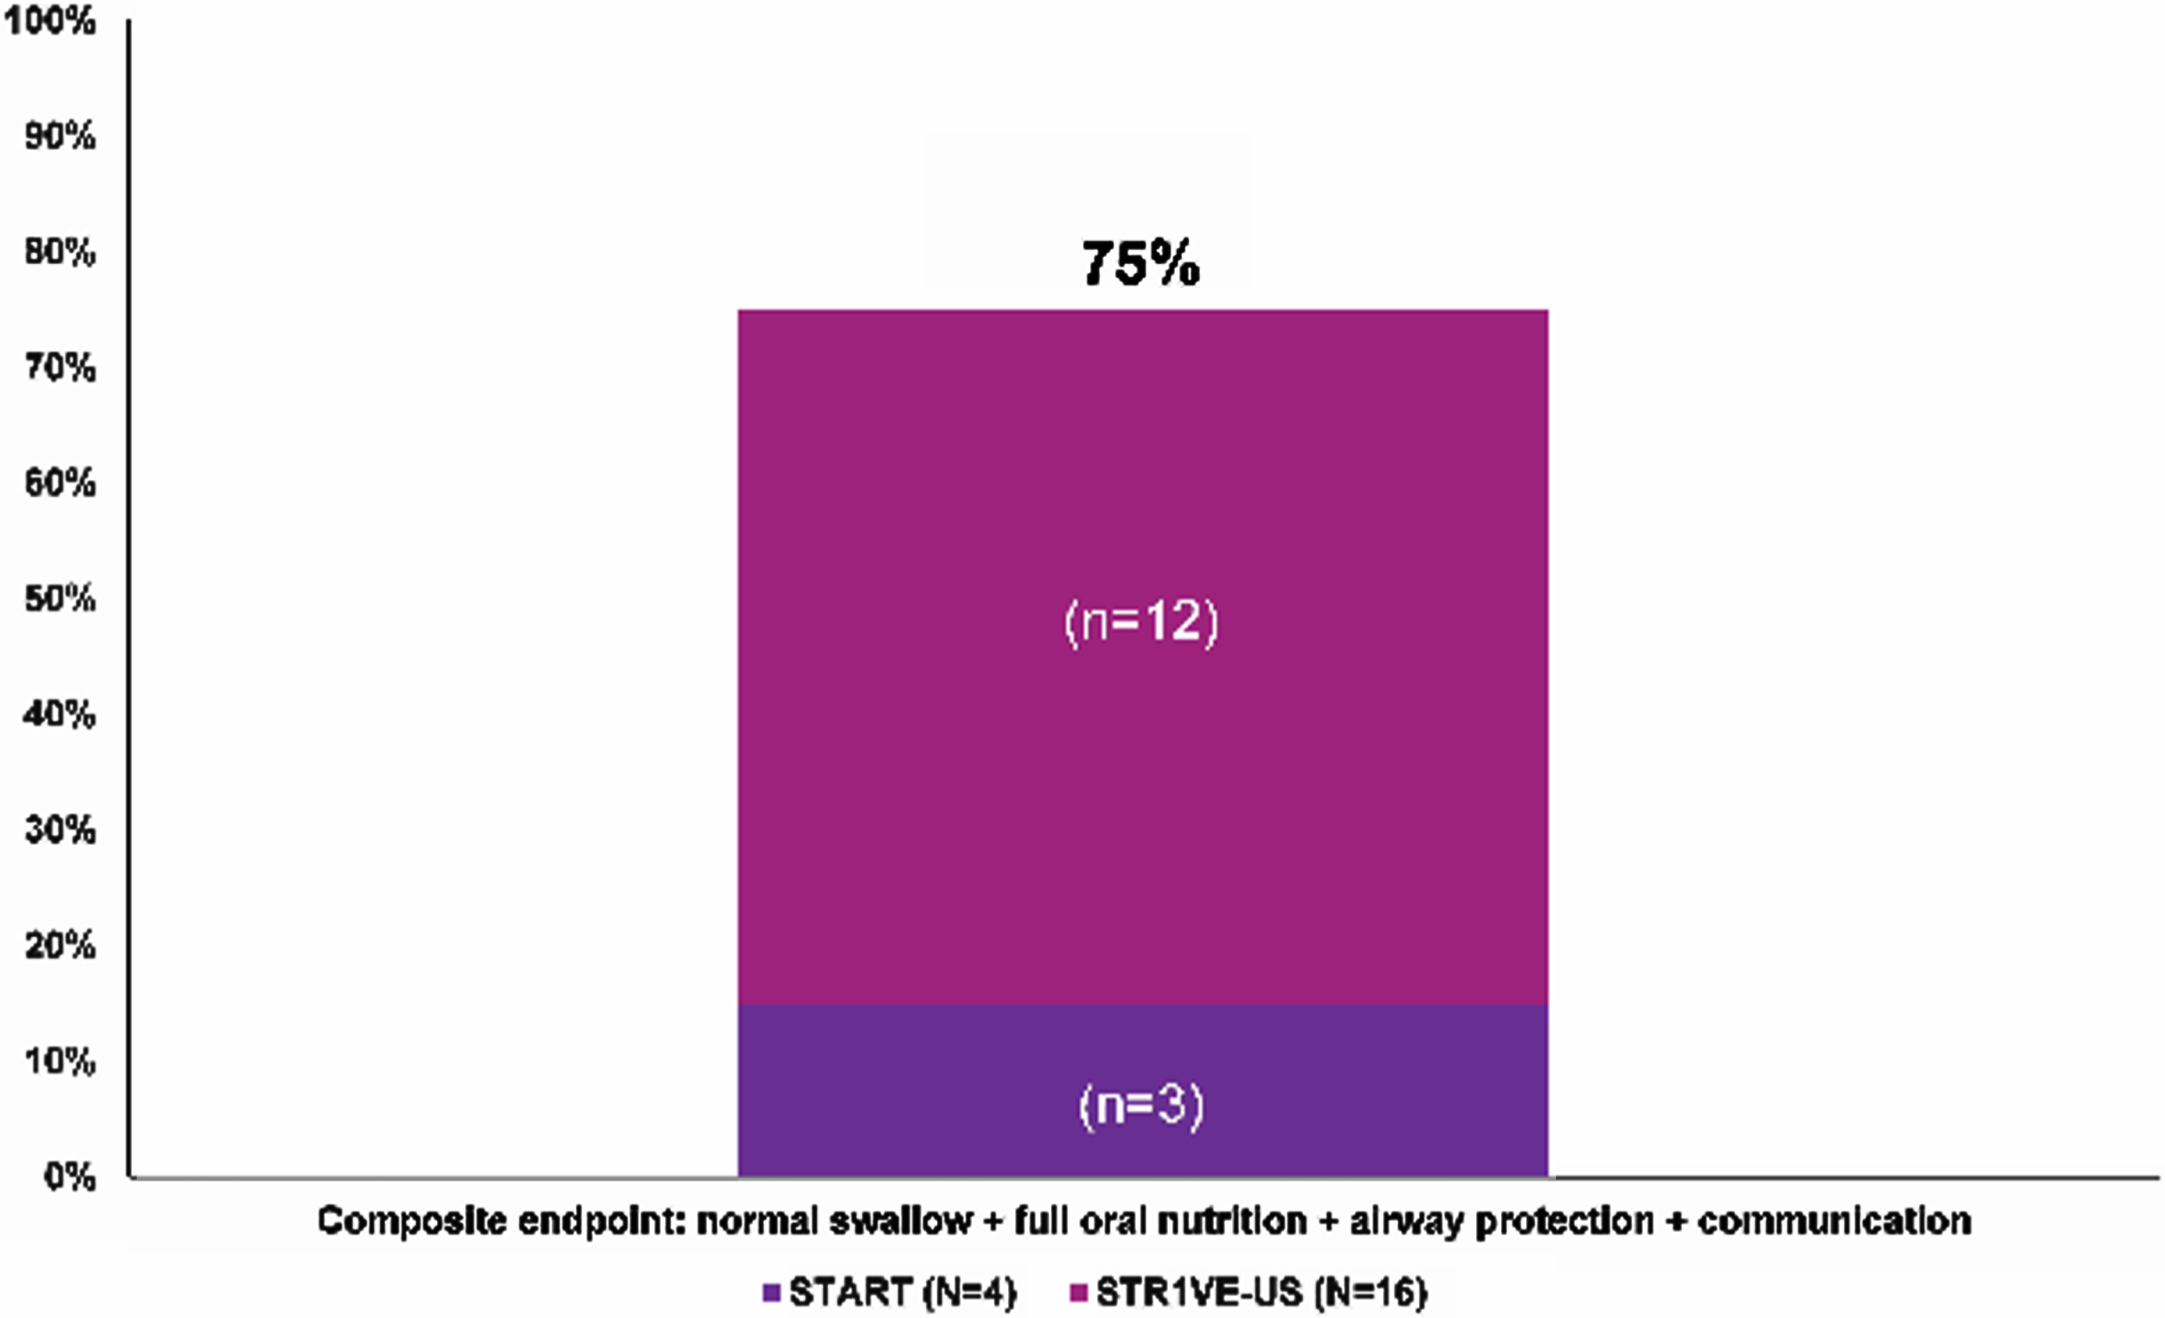 Percentage of patients meeting the composite endpointa representing bulbar function. aPercentages were calculated as a portion of patients with available data (N = 65 for swallow, nutrition, and airway protection; N = 20 for communication; N = 20 for composite endpoint). Communication was assessed for patients from native English-speaking families in START and STR1VE-US. In addition, communication was only assessed for patients in START who achieved a CHOP INTEND score ≥60. At baseline, communication was assessed for 20 patients in STR1VE-US; communication was assessed before end of study for four patients in START and 16 in STR1VE-US.